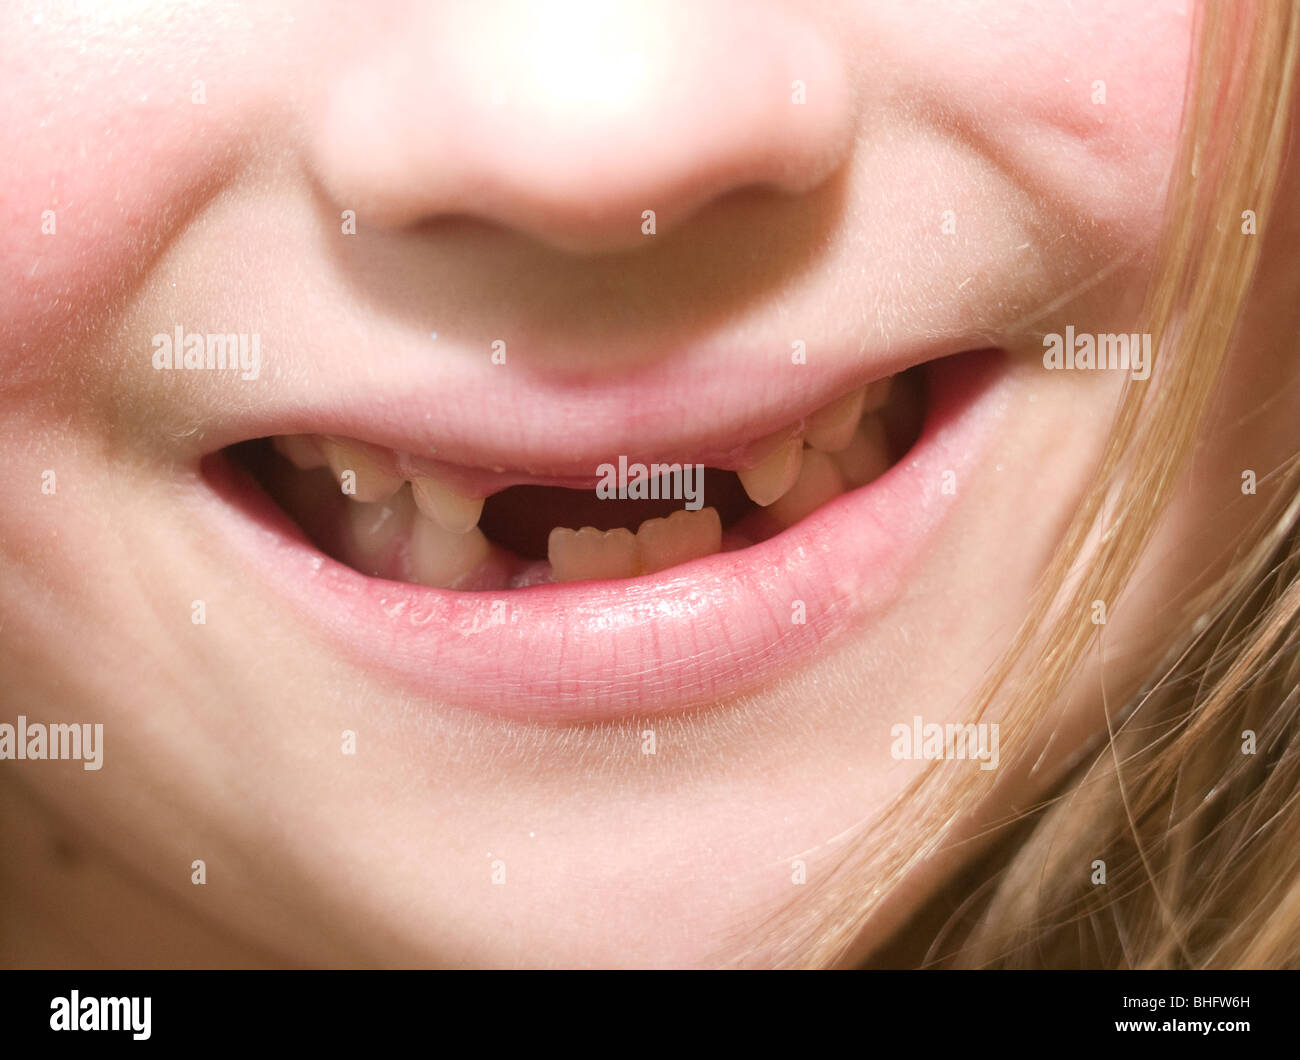 Girl with missing teeth Stock Photo